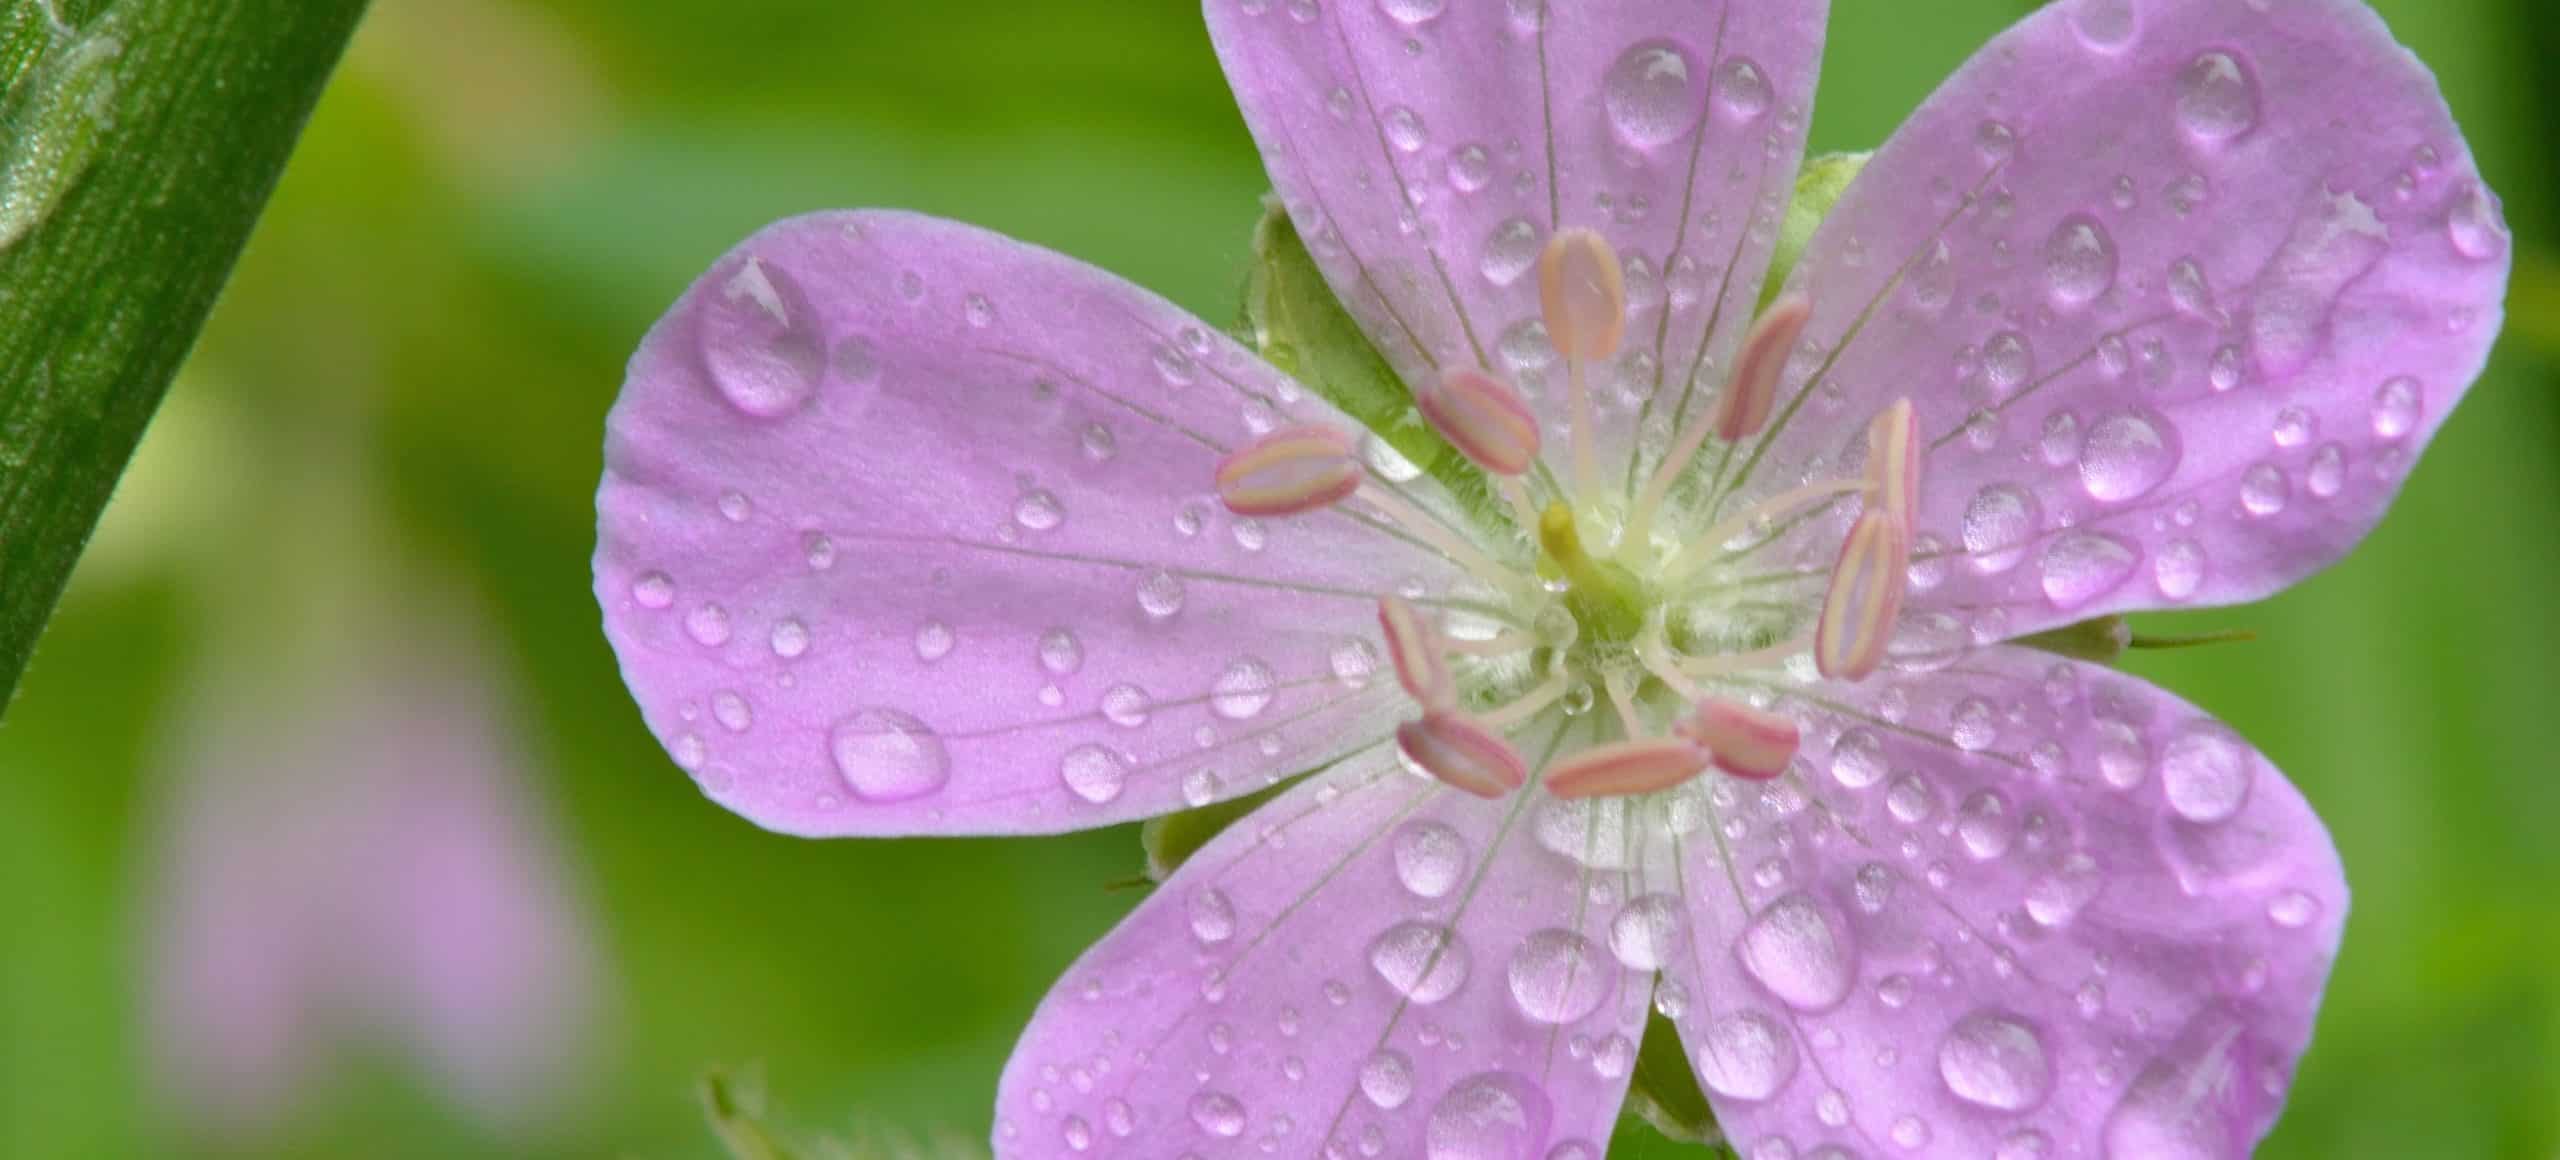 droplets of water on a close up of a pale purple flower